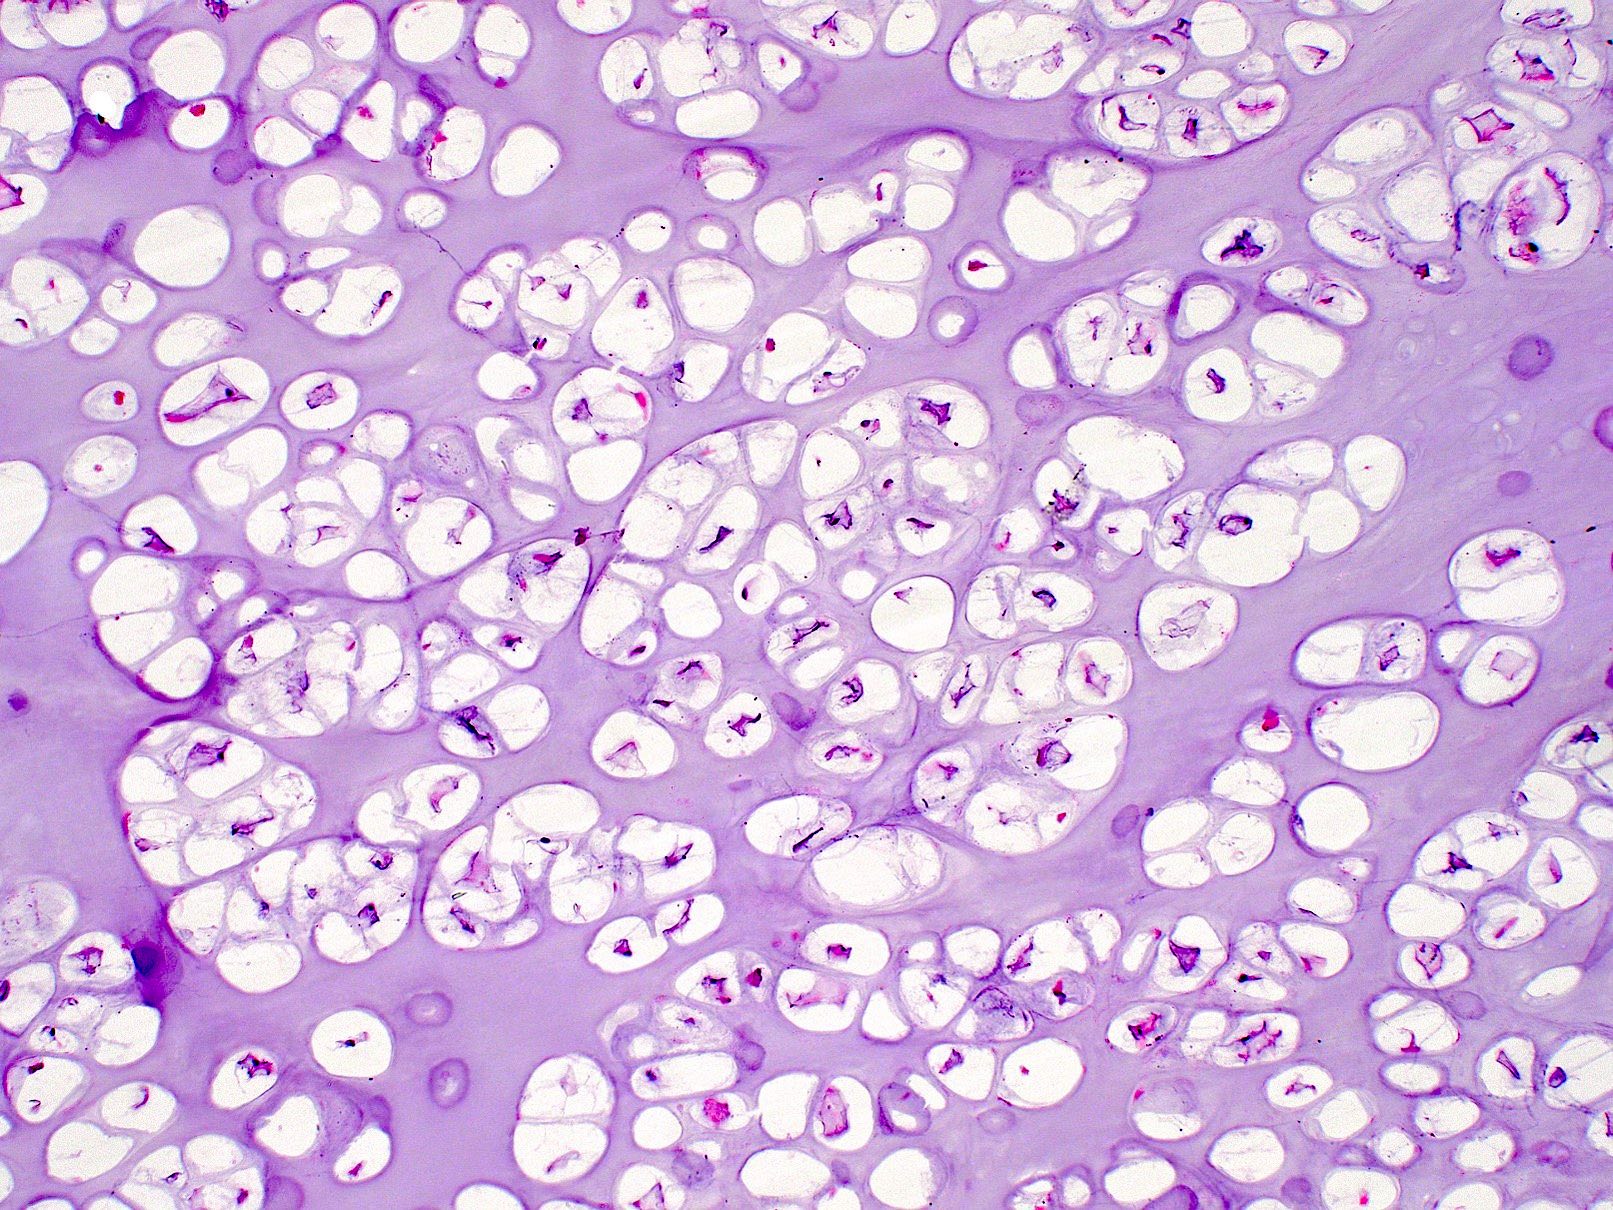 Chondrocytes with small nuclei